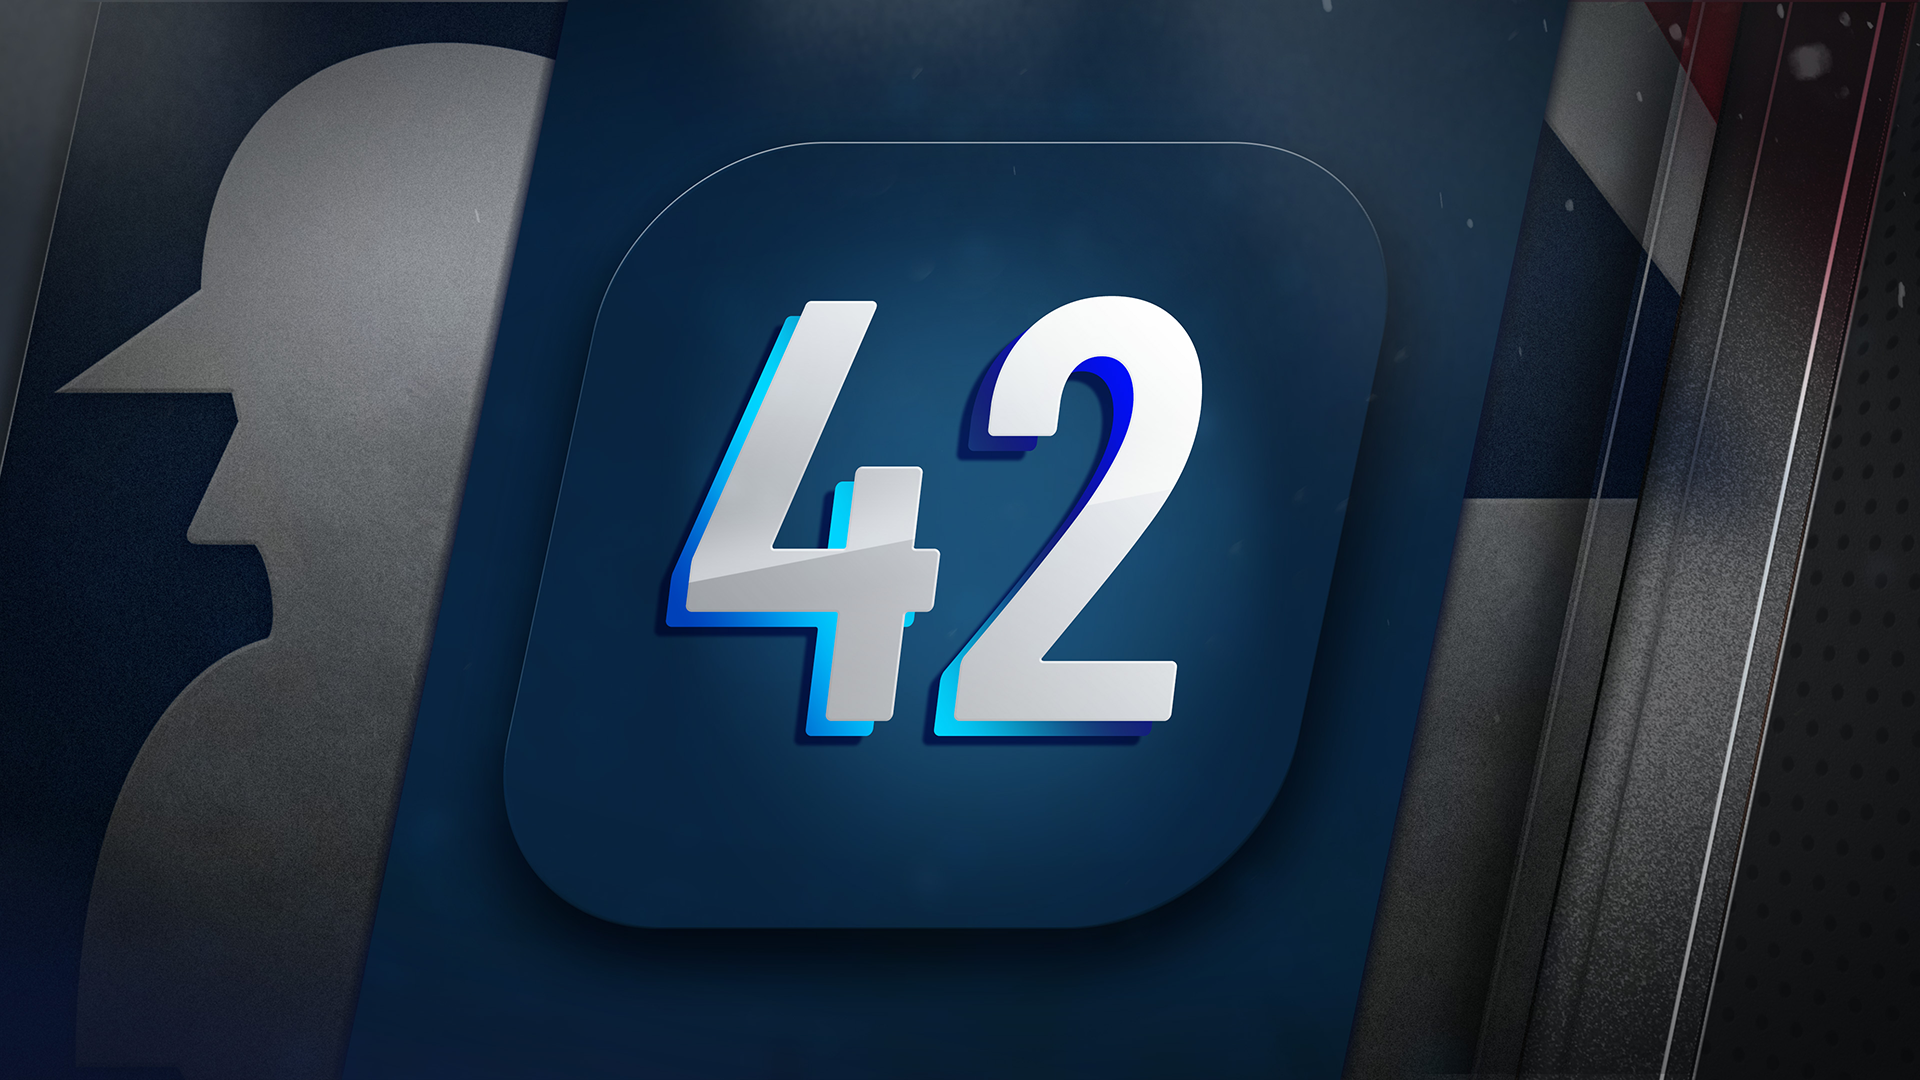 Icon for Remember 42